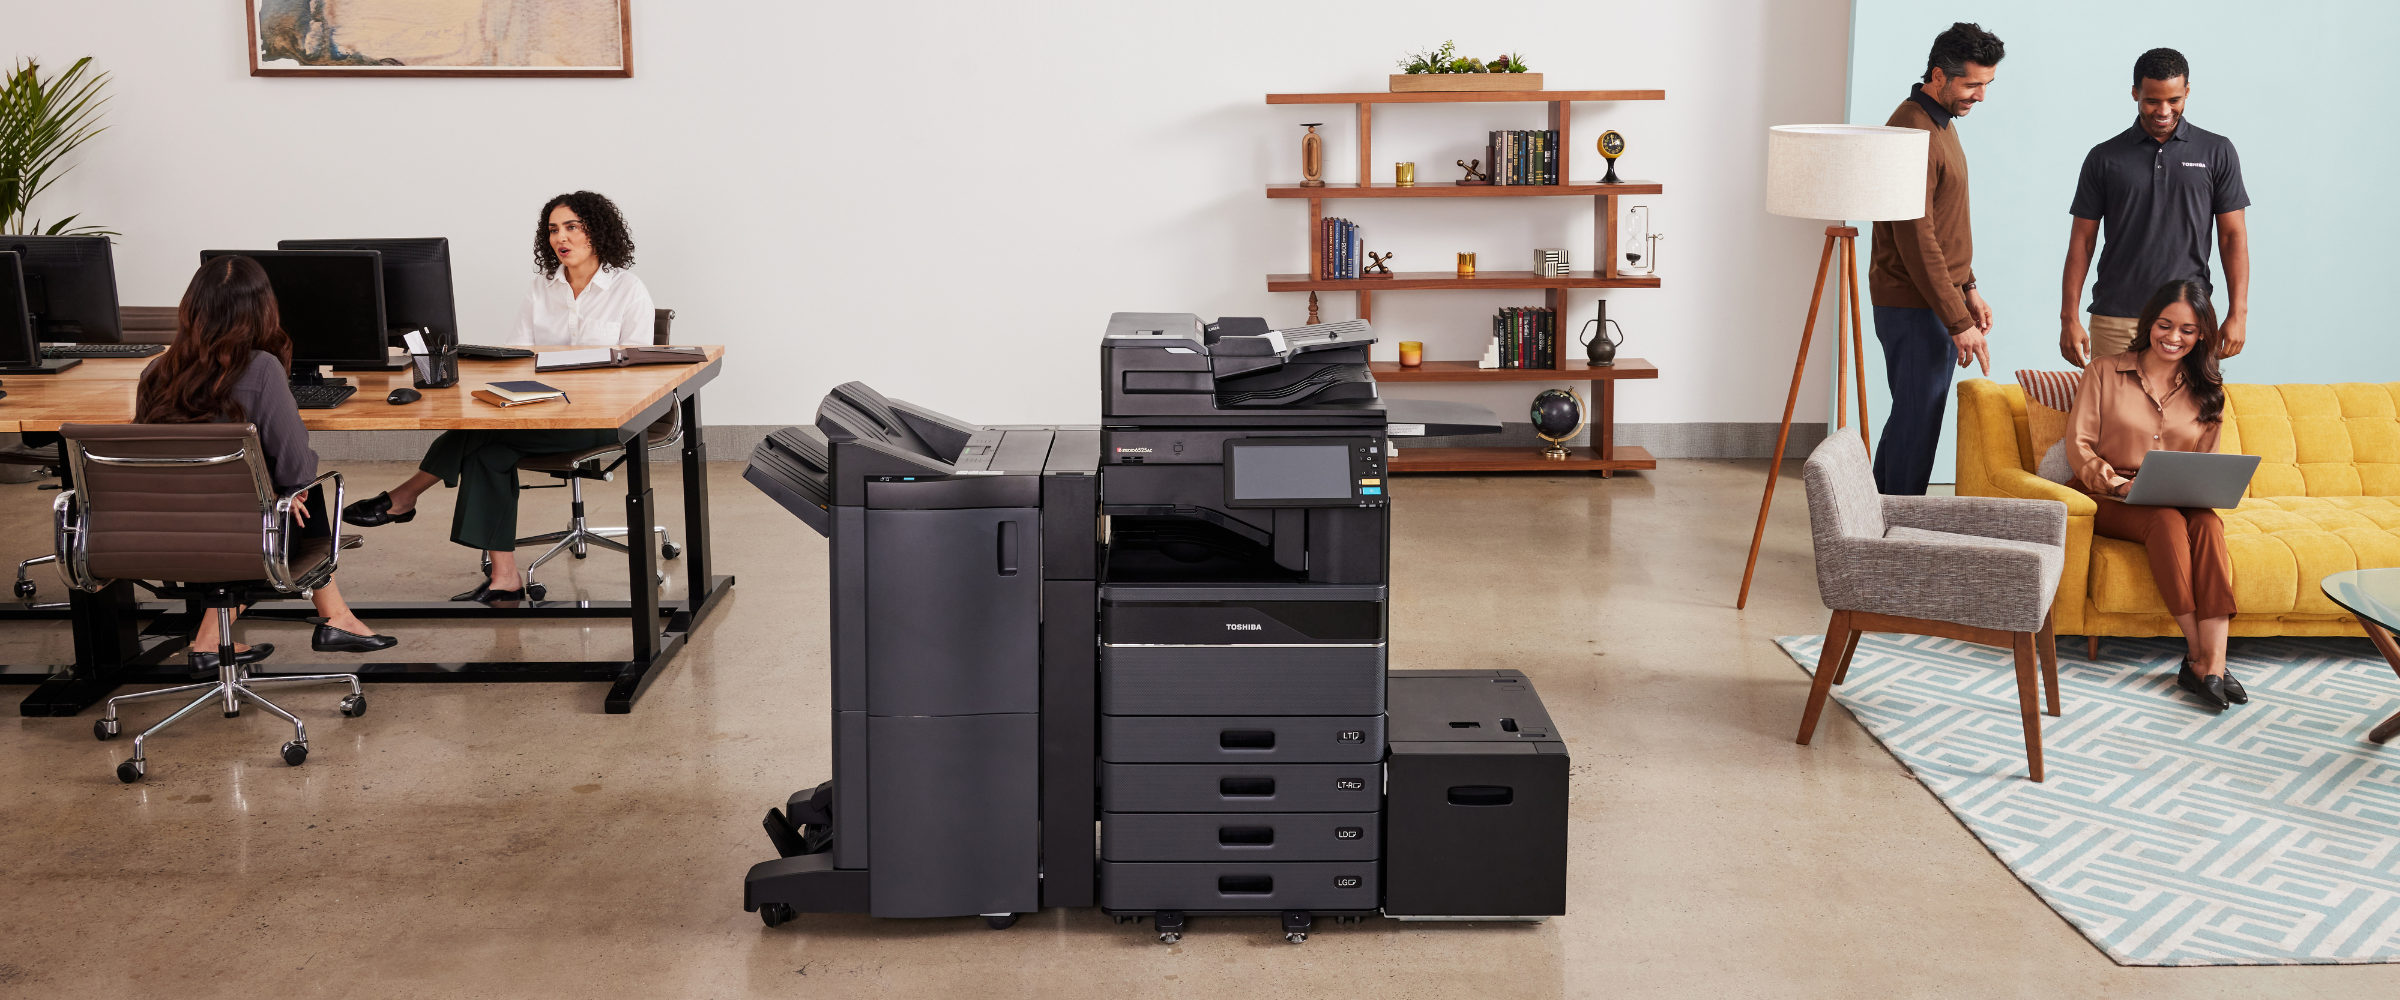 Toshiba MFP in the middle of a small office setting